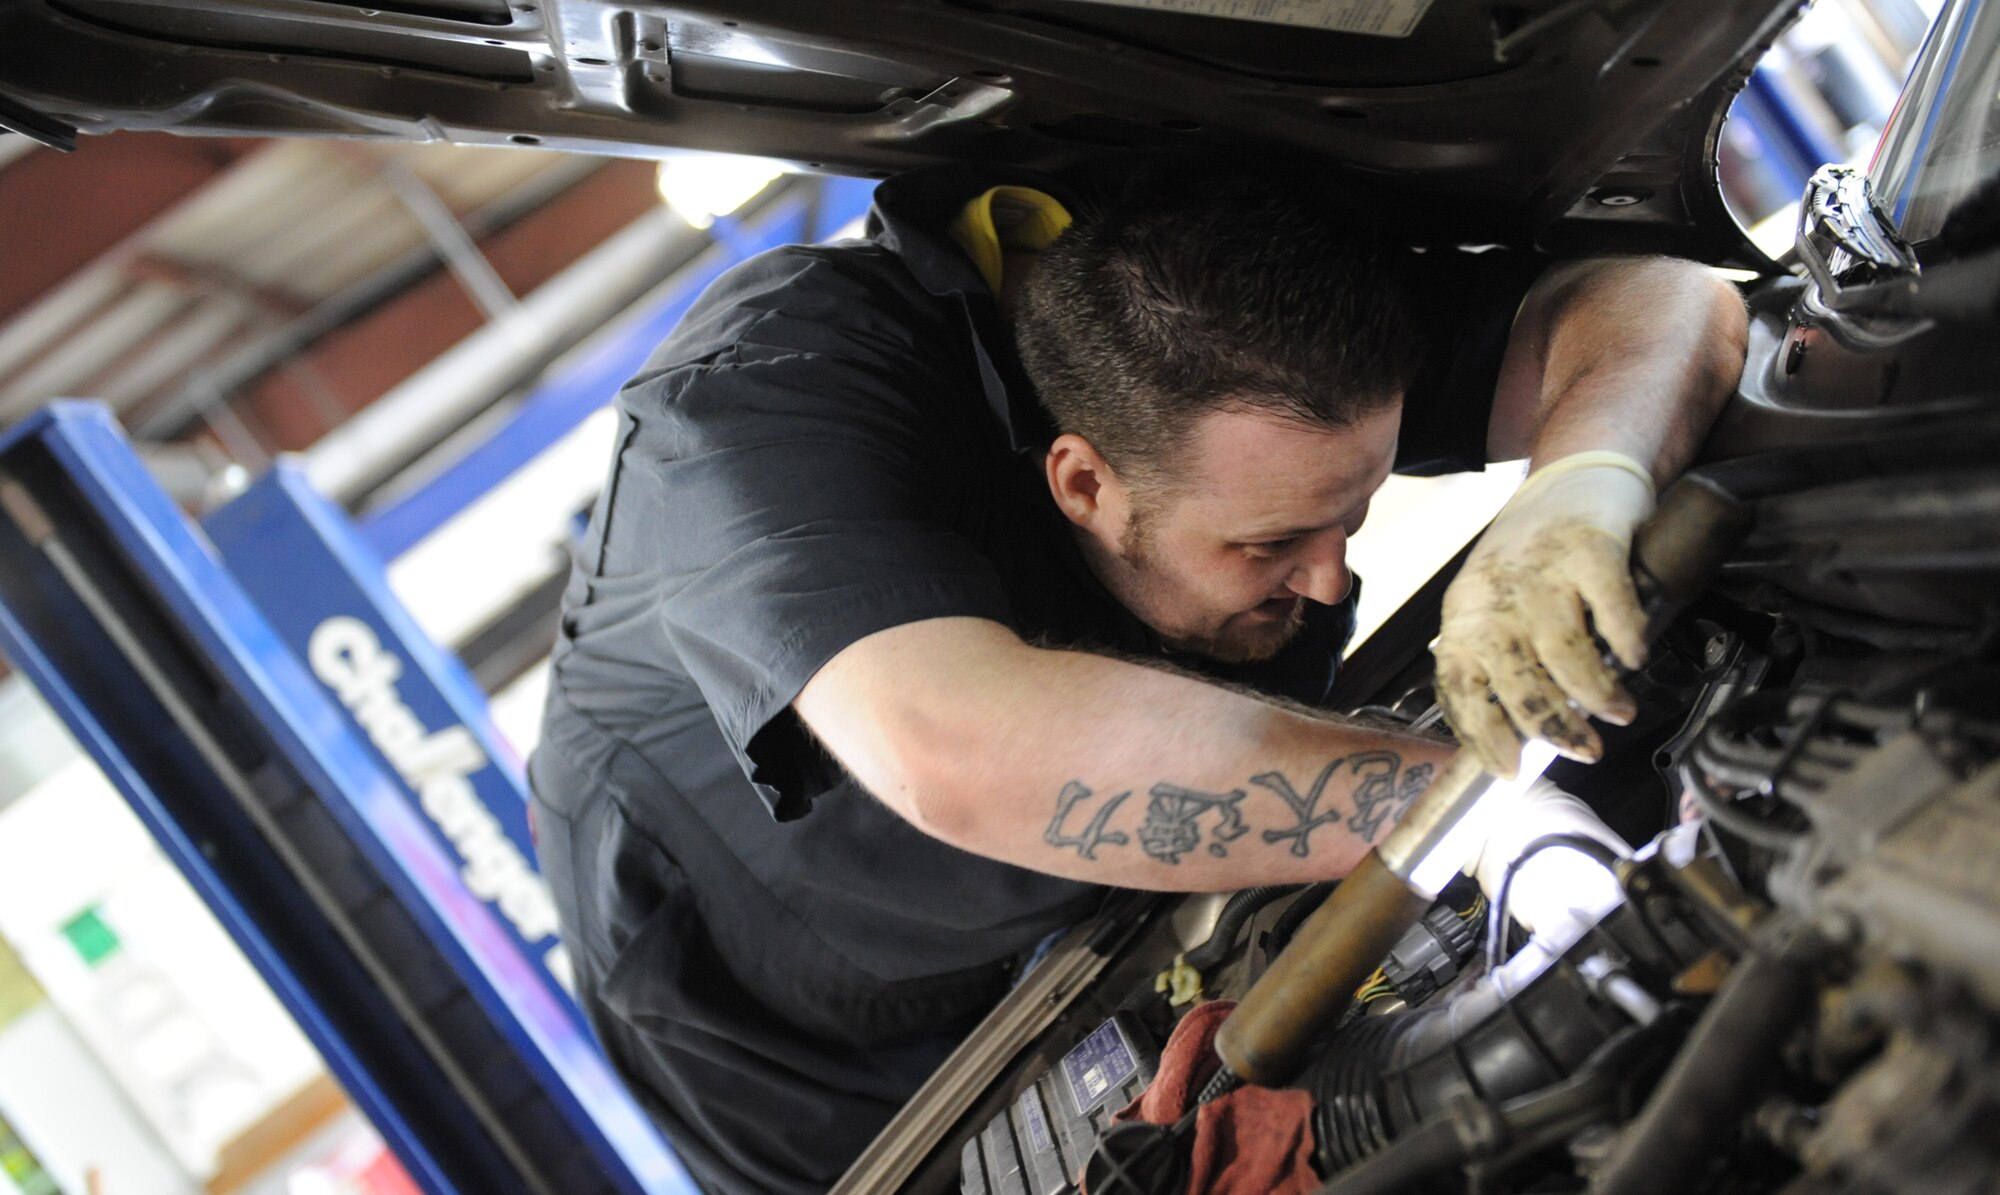 WHITEMAN AIR FORCE BASE, Mo. – Jacob Gooden, Auto Hobby Shop mechanic and husband of Staff Sgt. Angela Gooden, 509th Force Support Squadron, changes a hose on a Team Whiteman member’s car May 26. The Auto Hobby Shop is open Tuesday through Thursday from 8 a.m. to 5 p.m., Friday from 8 a.m. to 6 p.m. and 8 a.m. to 5 p.m. Saturday.  (U.S. Air Force photo/ Senior Airman Stephen Linch)